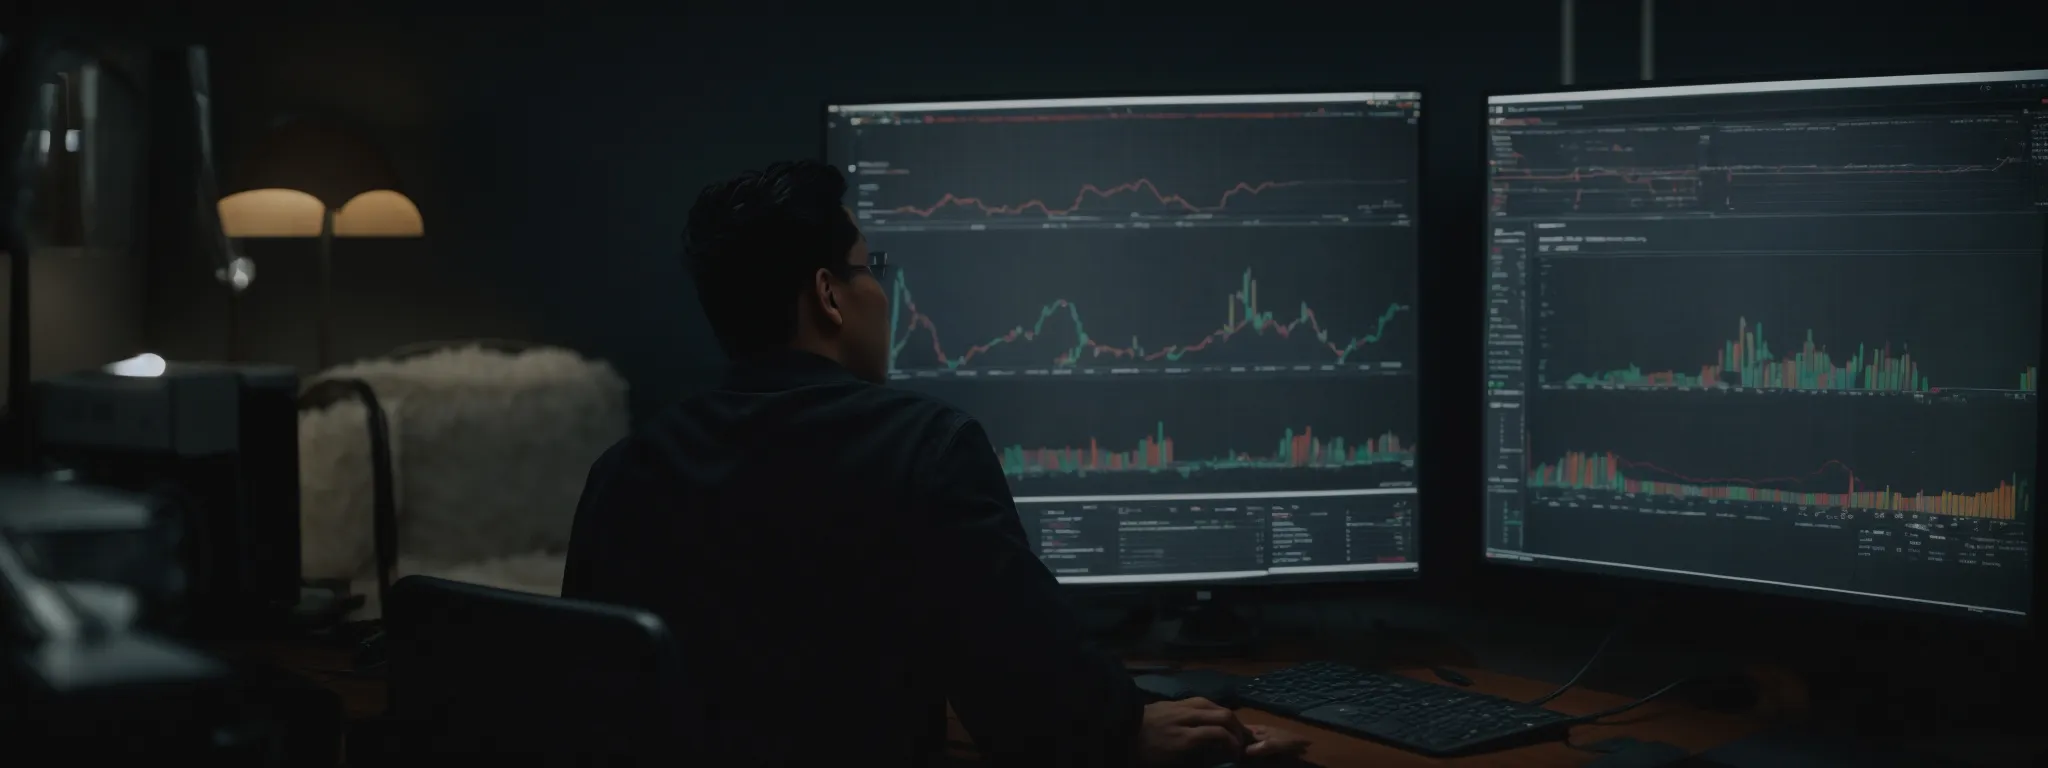 a person analyzing graphs and charts on a computer screen to optimize digital marketing strategies.